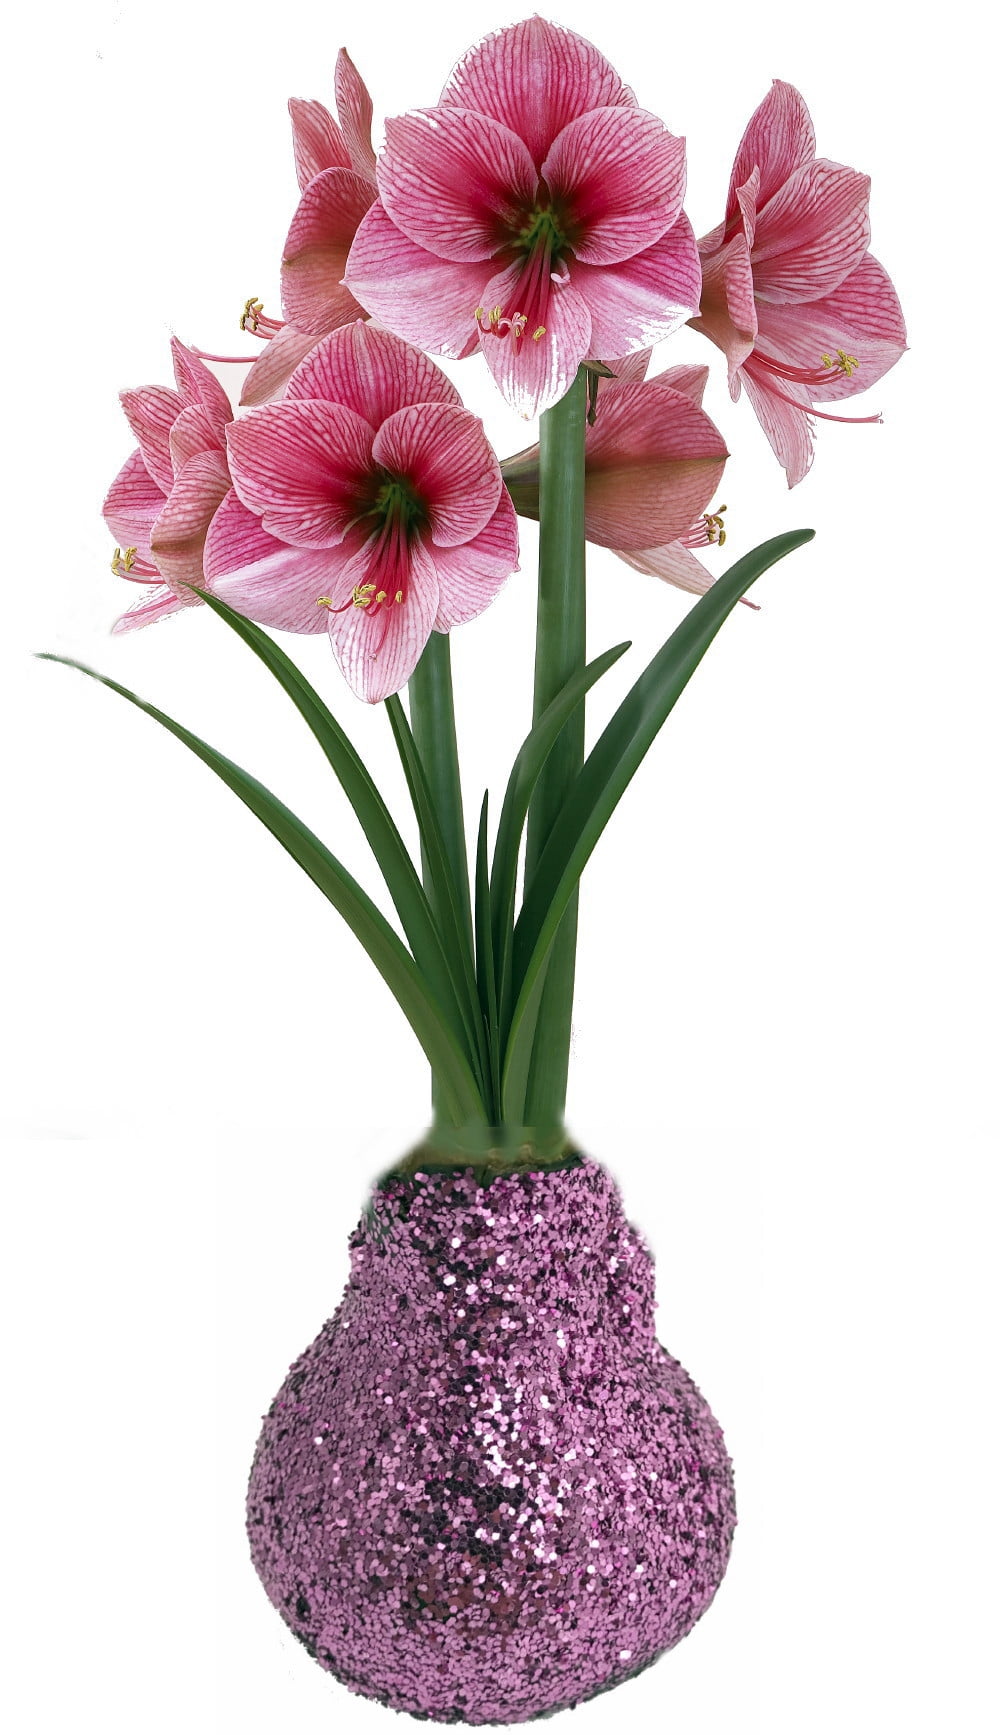 How To Grow A Waxed Amaryllis Bulb Magenta Glitter Dipped Waxed Amaryllis Bulb - Immediate Shipping/Holiday  Blooms - Walmart.com